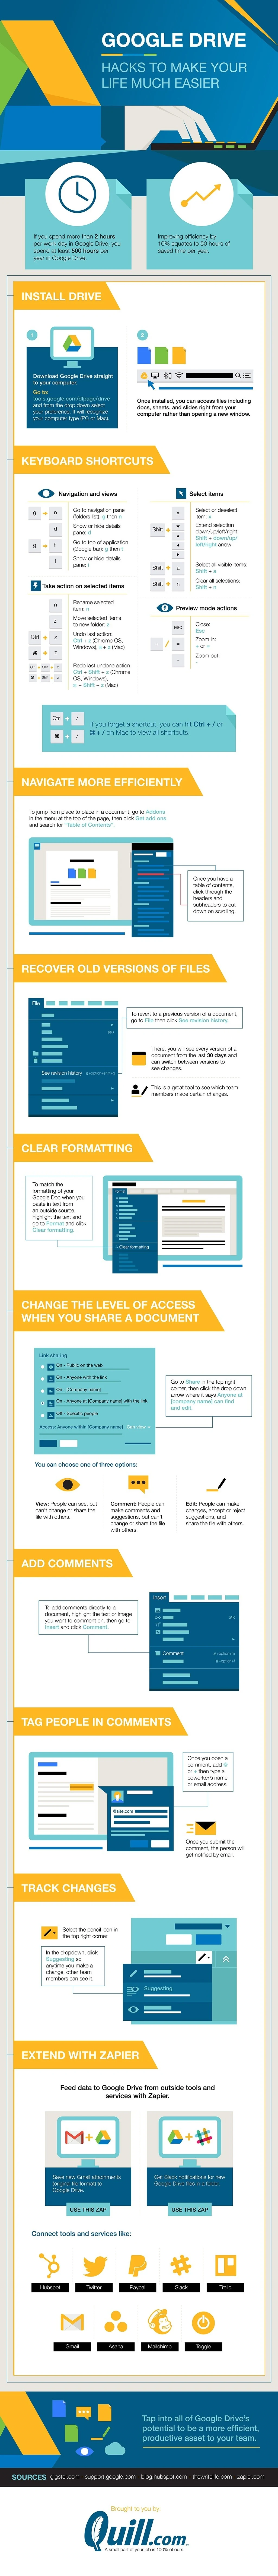 Google Drive Hacks to Make your Life Much Easier - #infographic